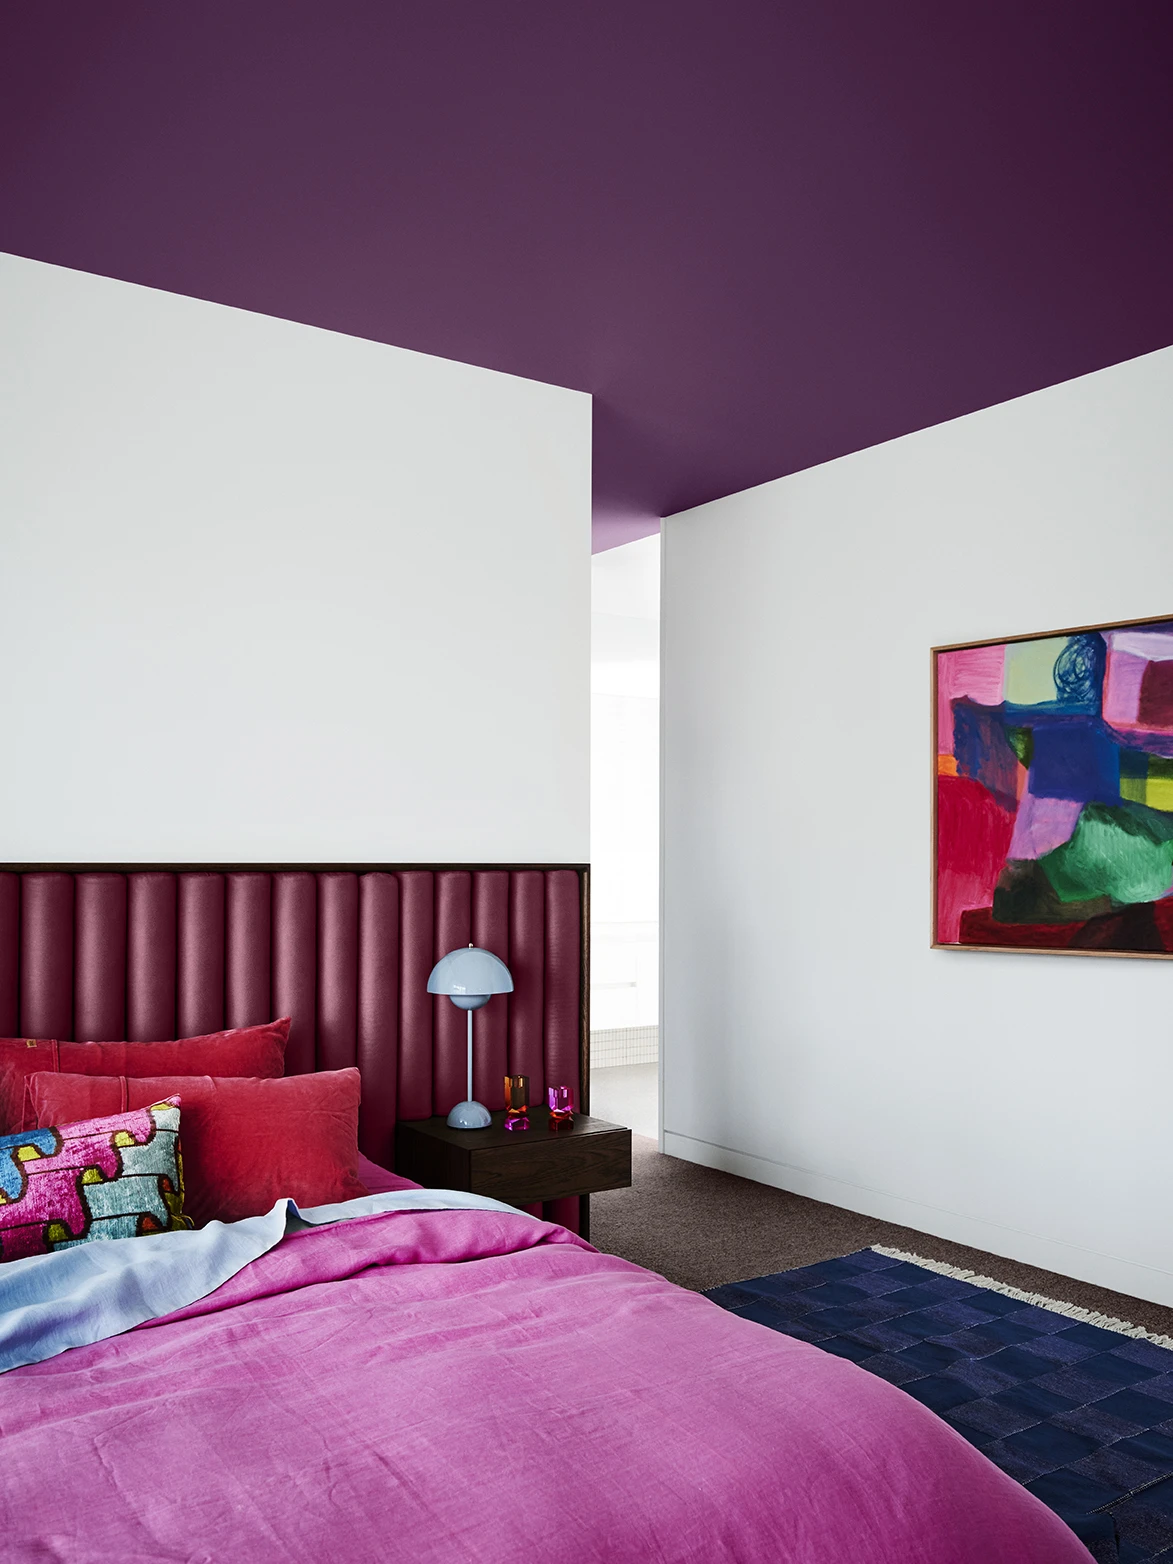 Bedroom with purple bedhead and ceiling and white walls